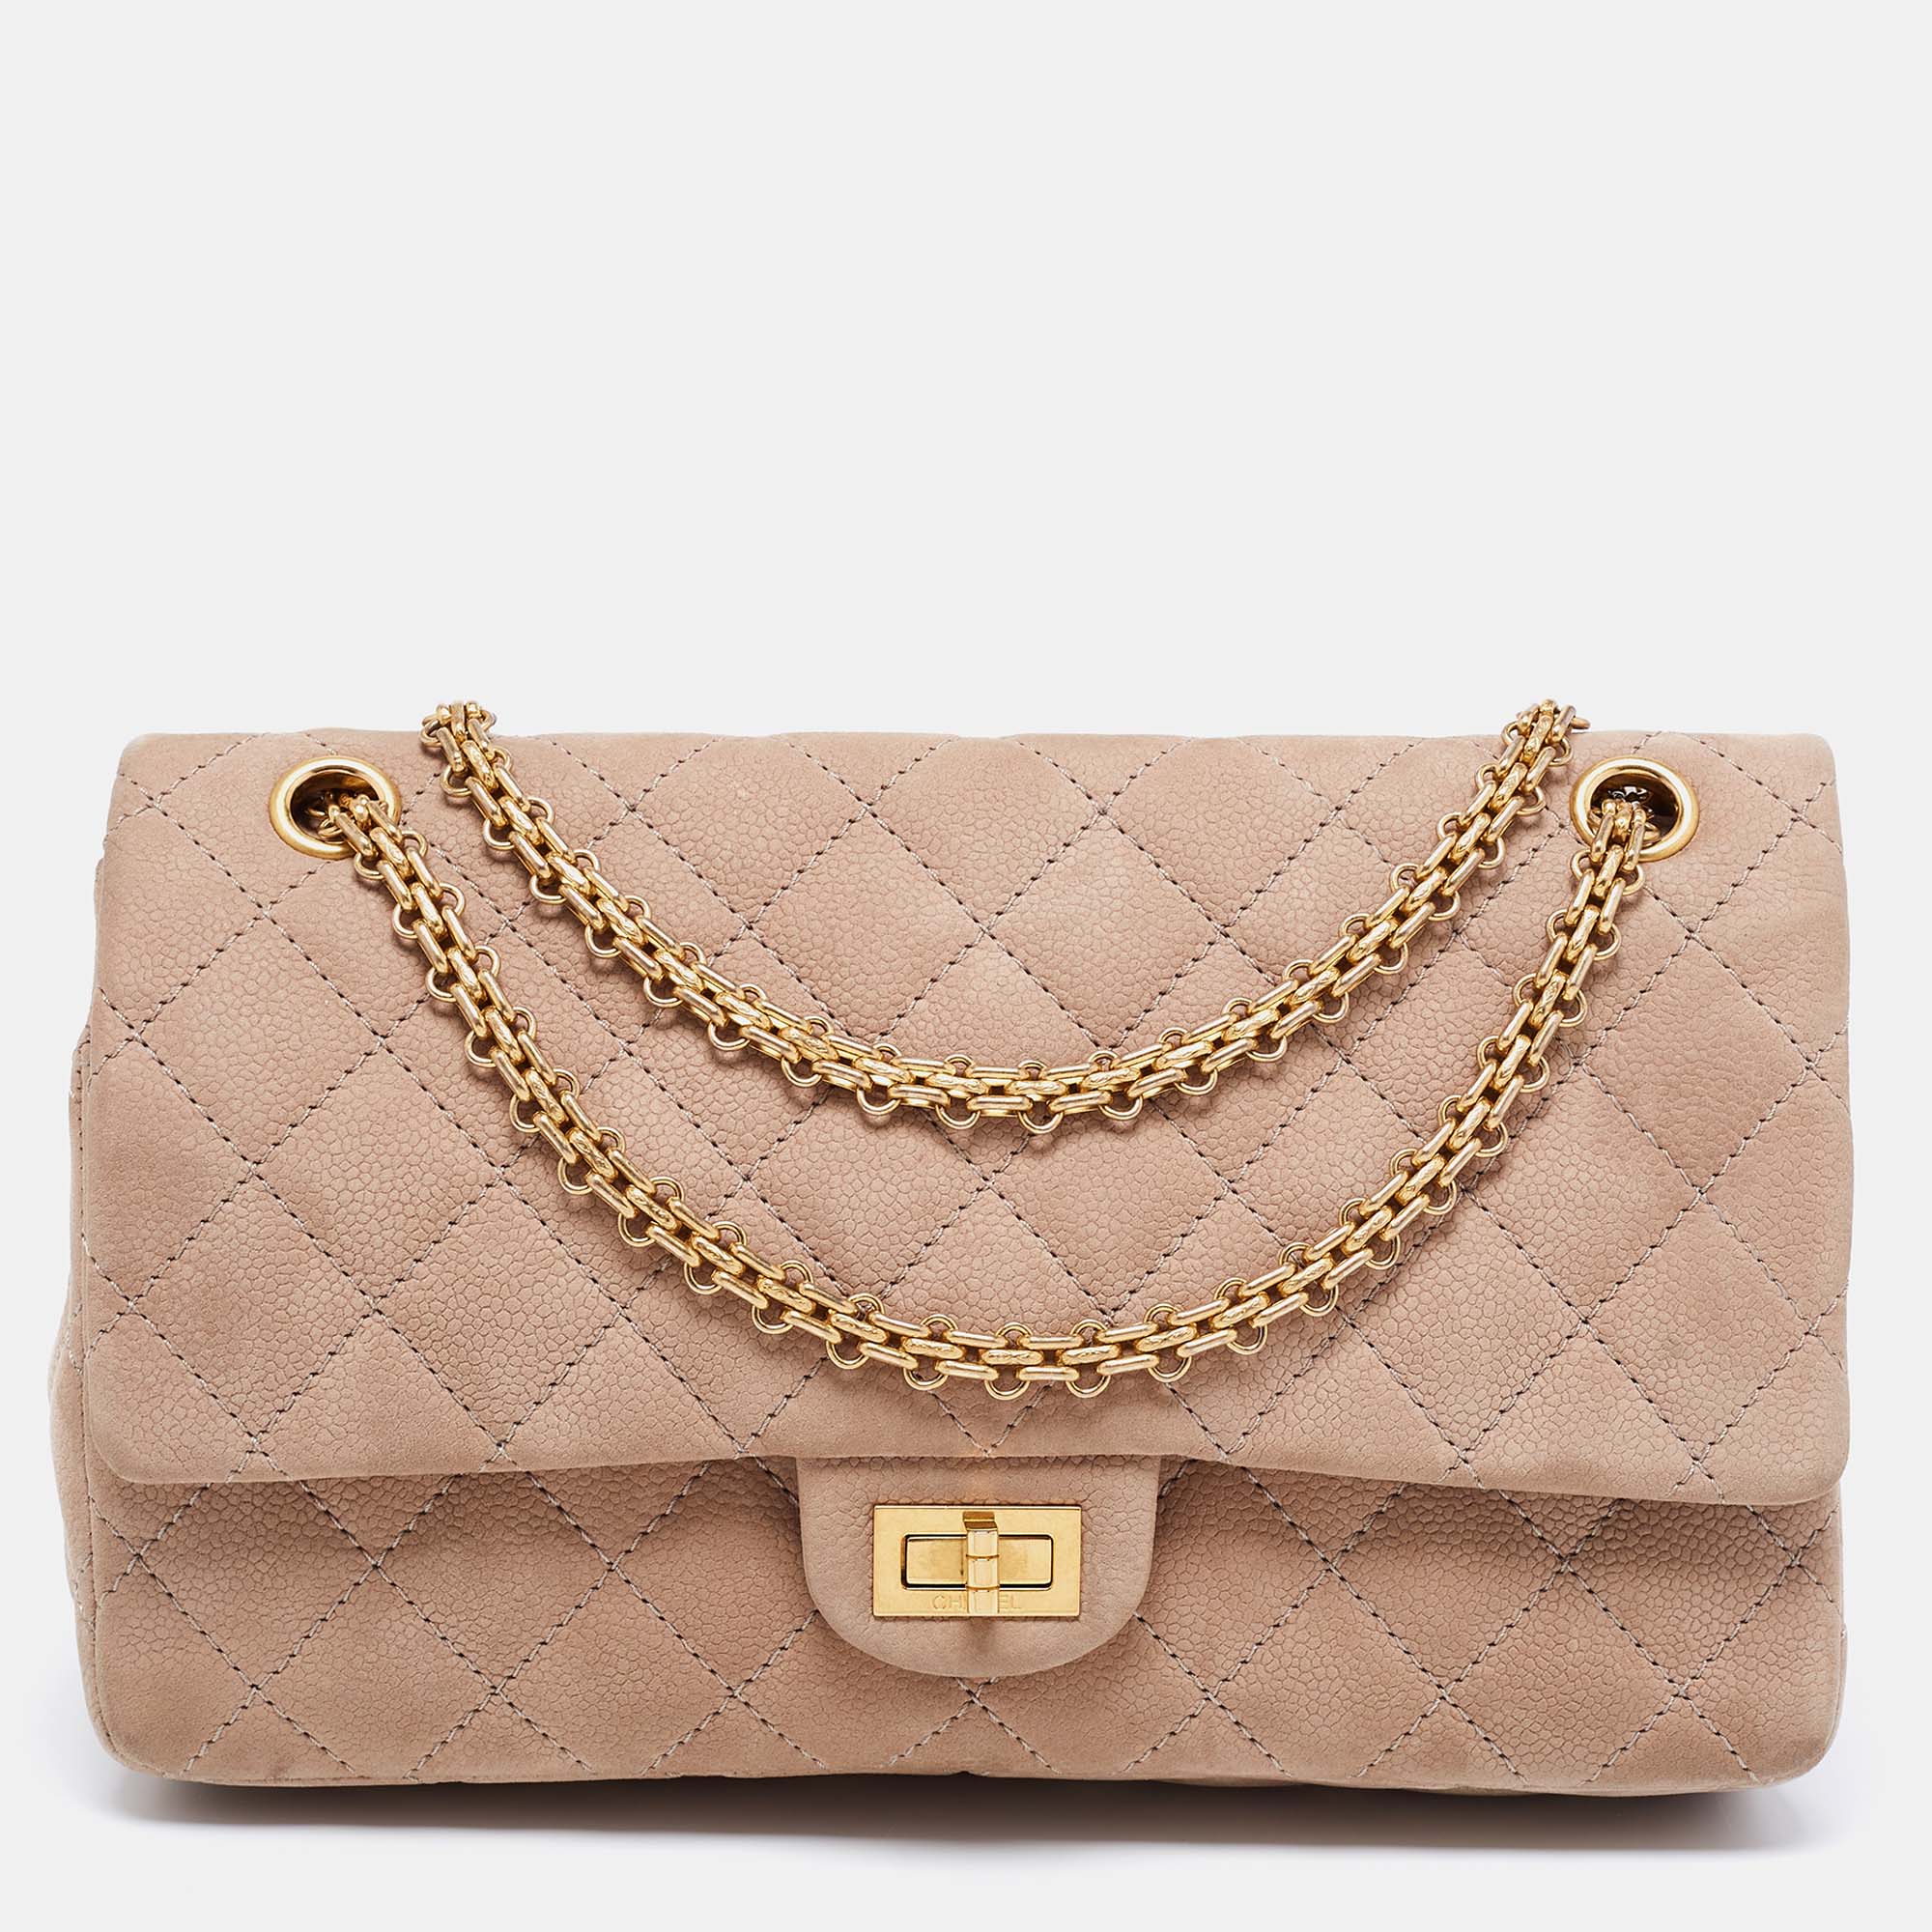 CHANEL 2.55 Leather Bags & Handbags for Women